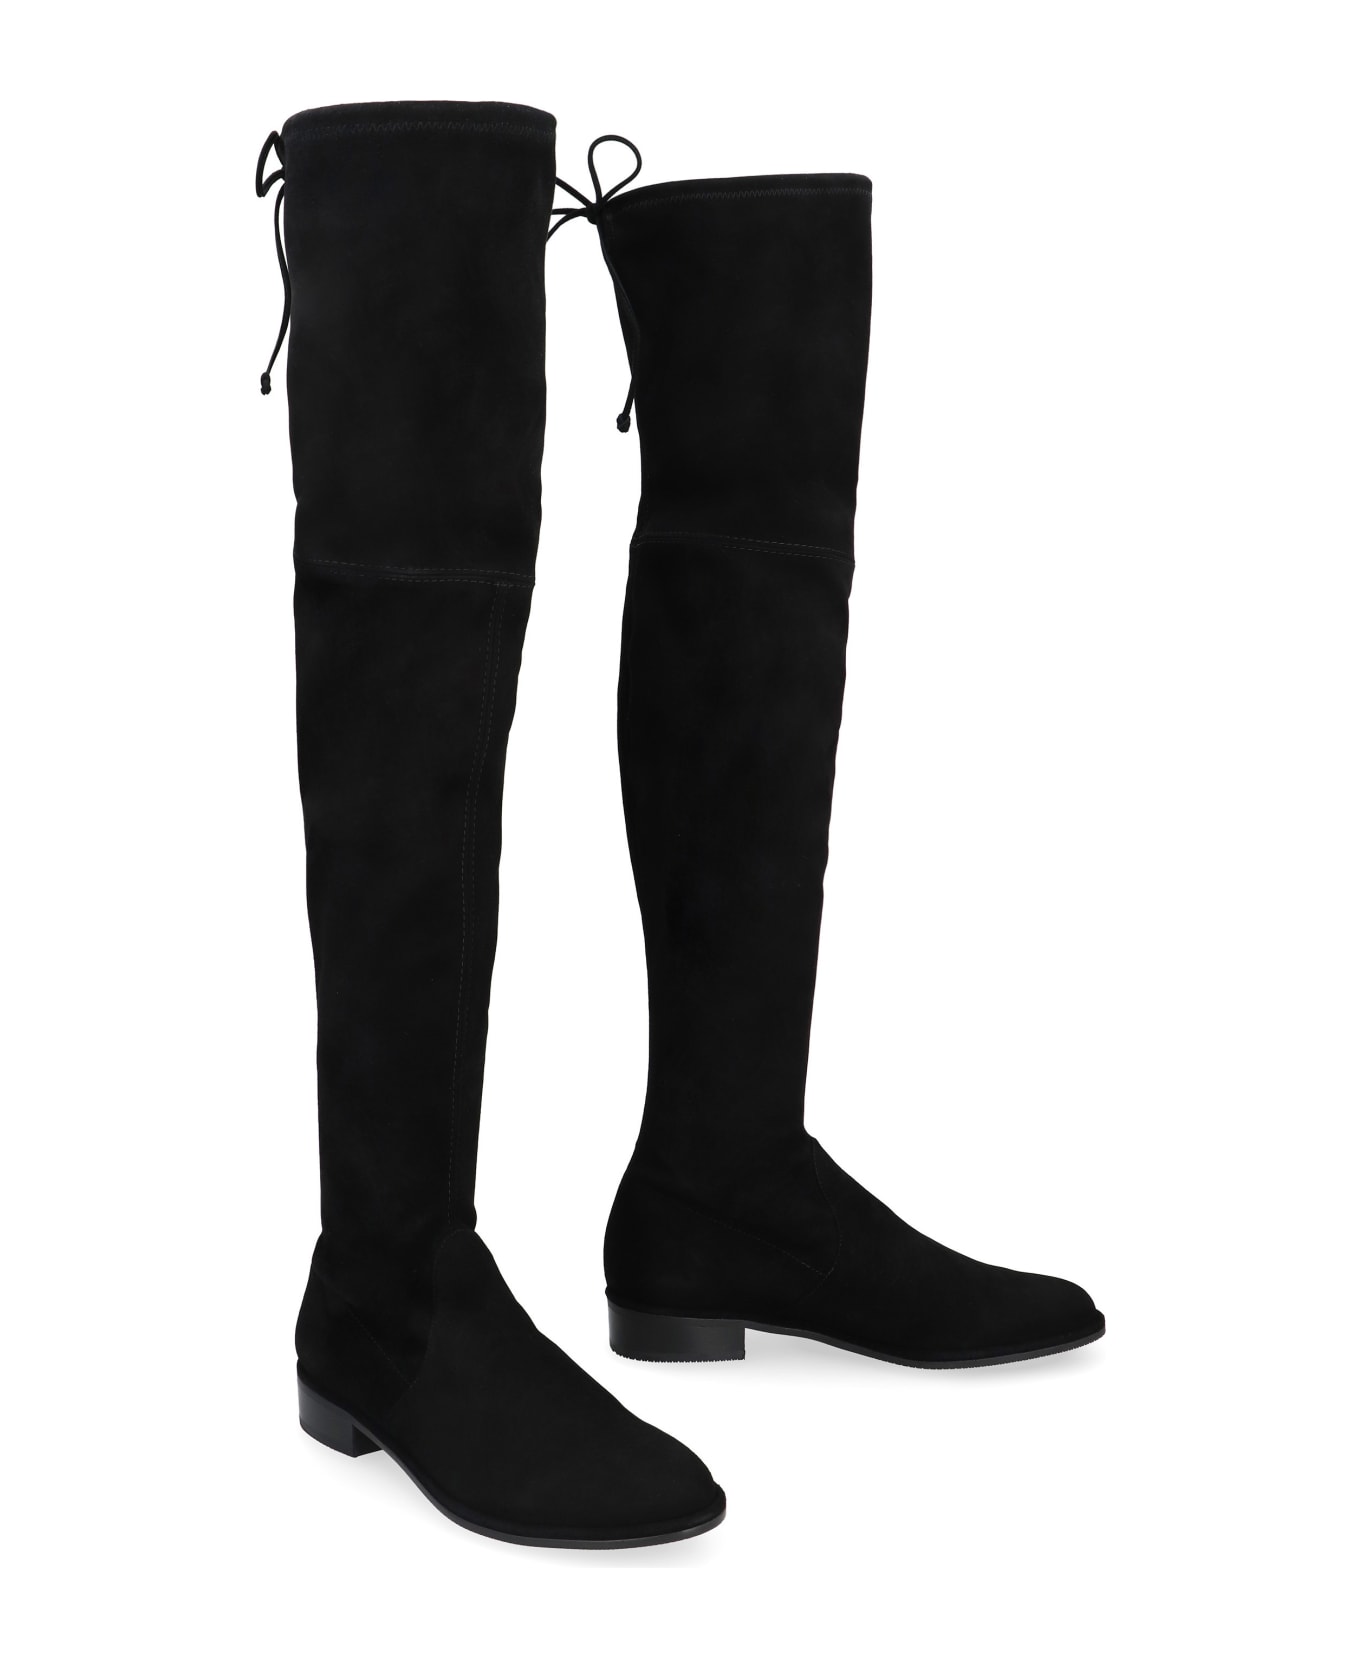 Stuart Weitzman Lowland Stretch Suede Over The Knee Boots - black